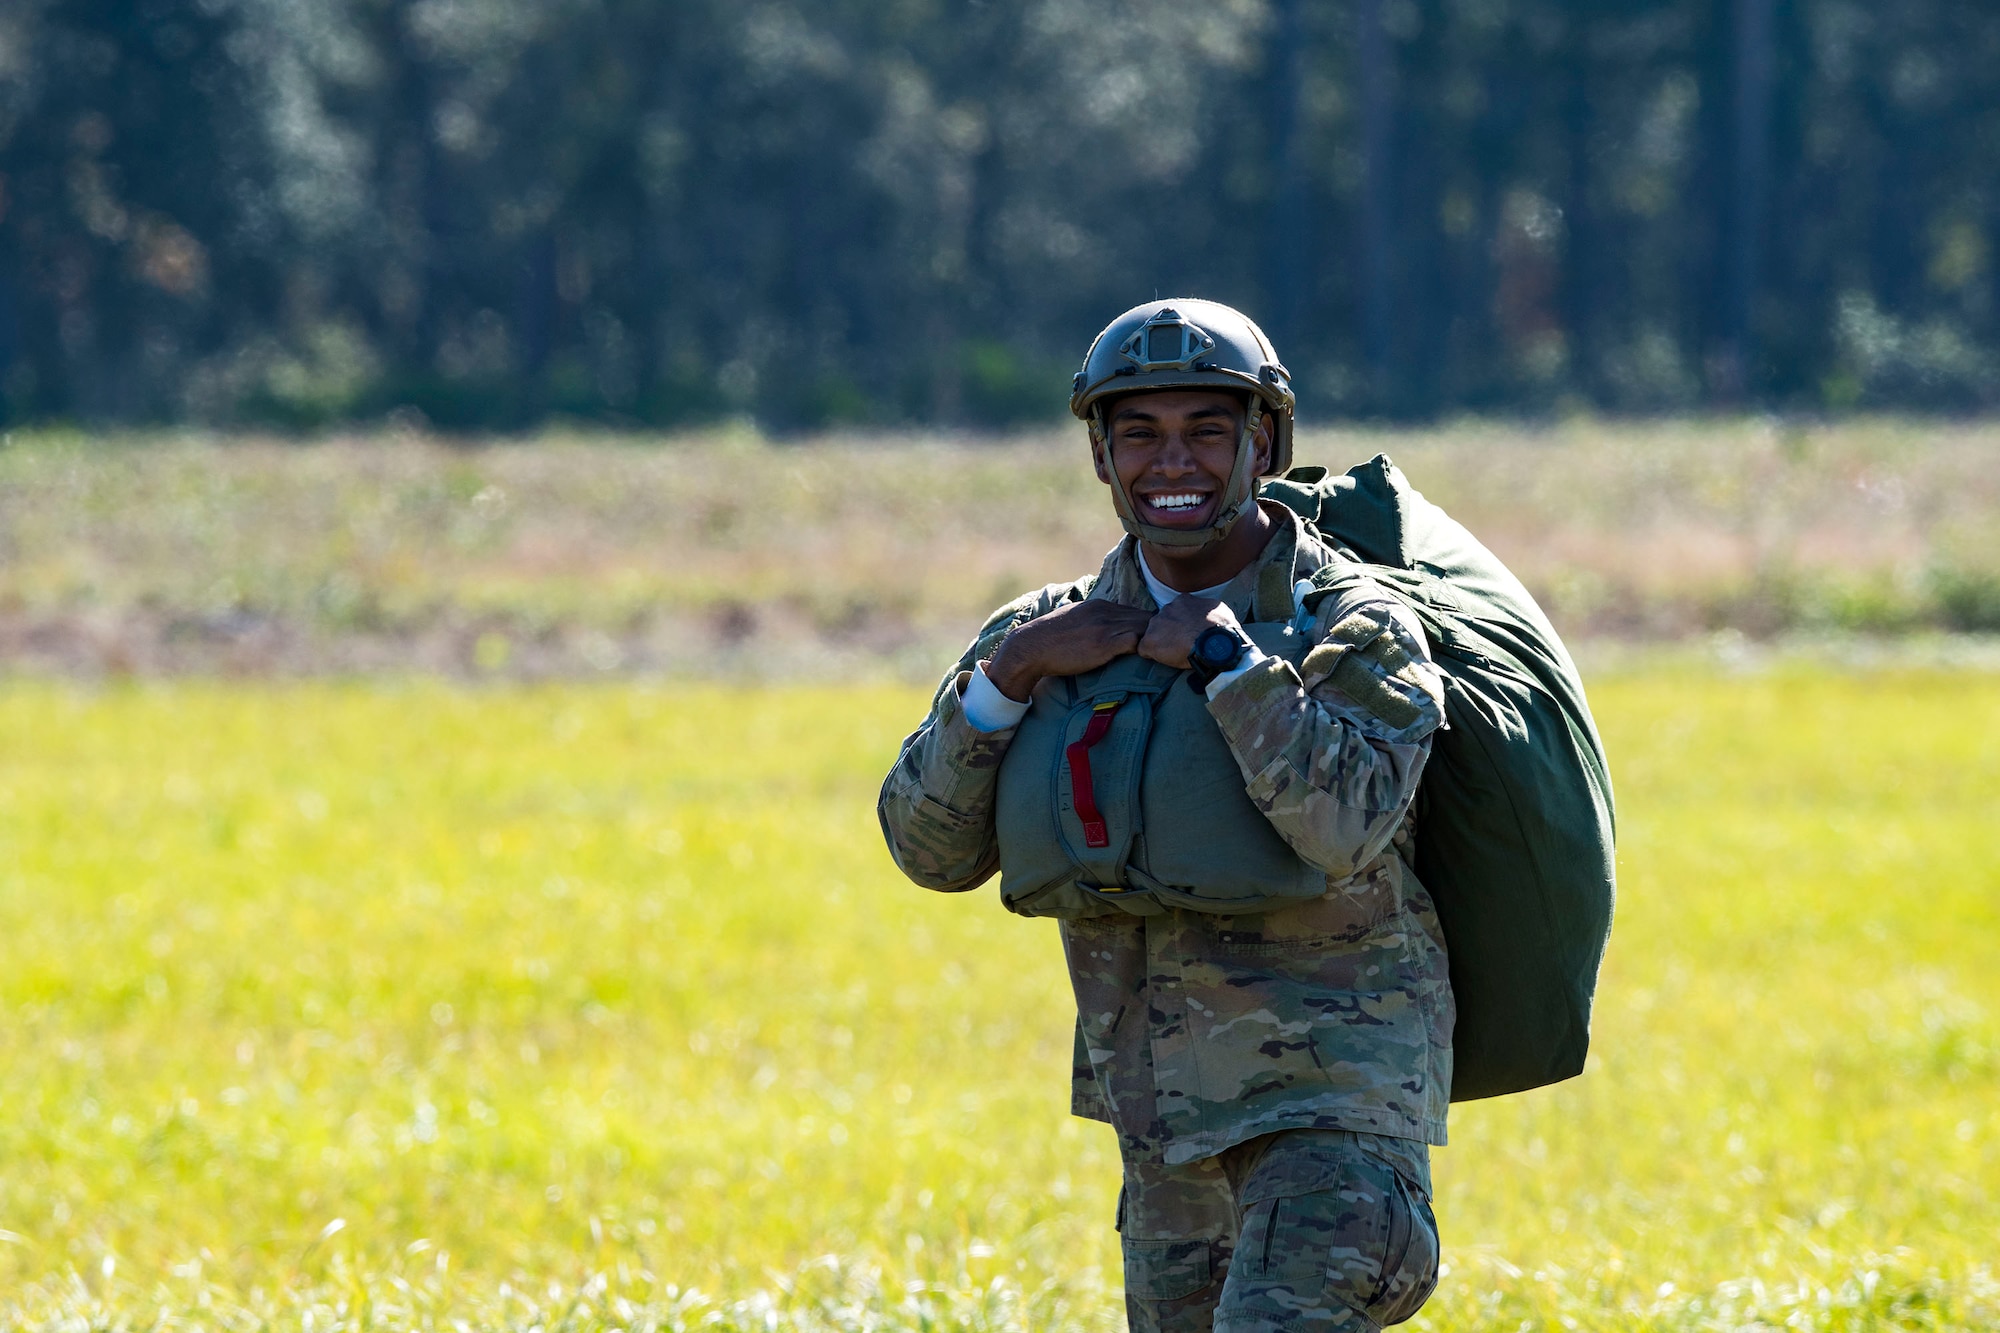 Tech. Sgt. Christopher Zavala, 822d Base Defense Squadron jumpmaster, walks away from a drop zone after packing up his parachute during static-line jump training, Nov. 21, 2018, at Moody Air Force Base, Ga. The overall objective of the training was to increase jumpers’ skills, knowledge and proficiency in regards to airborne operations. During a static-line jump, the jumper is attached to the aircraft via the ‘static-line’, which automatically deploys the jumpers’ parachute after they’ve exited the aircraft. (U.S. Air Force photo by Airman 1st Class Erick Requadt)